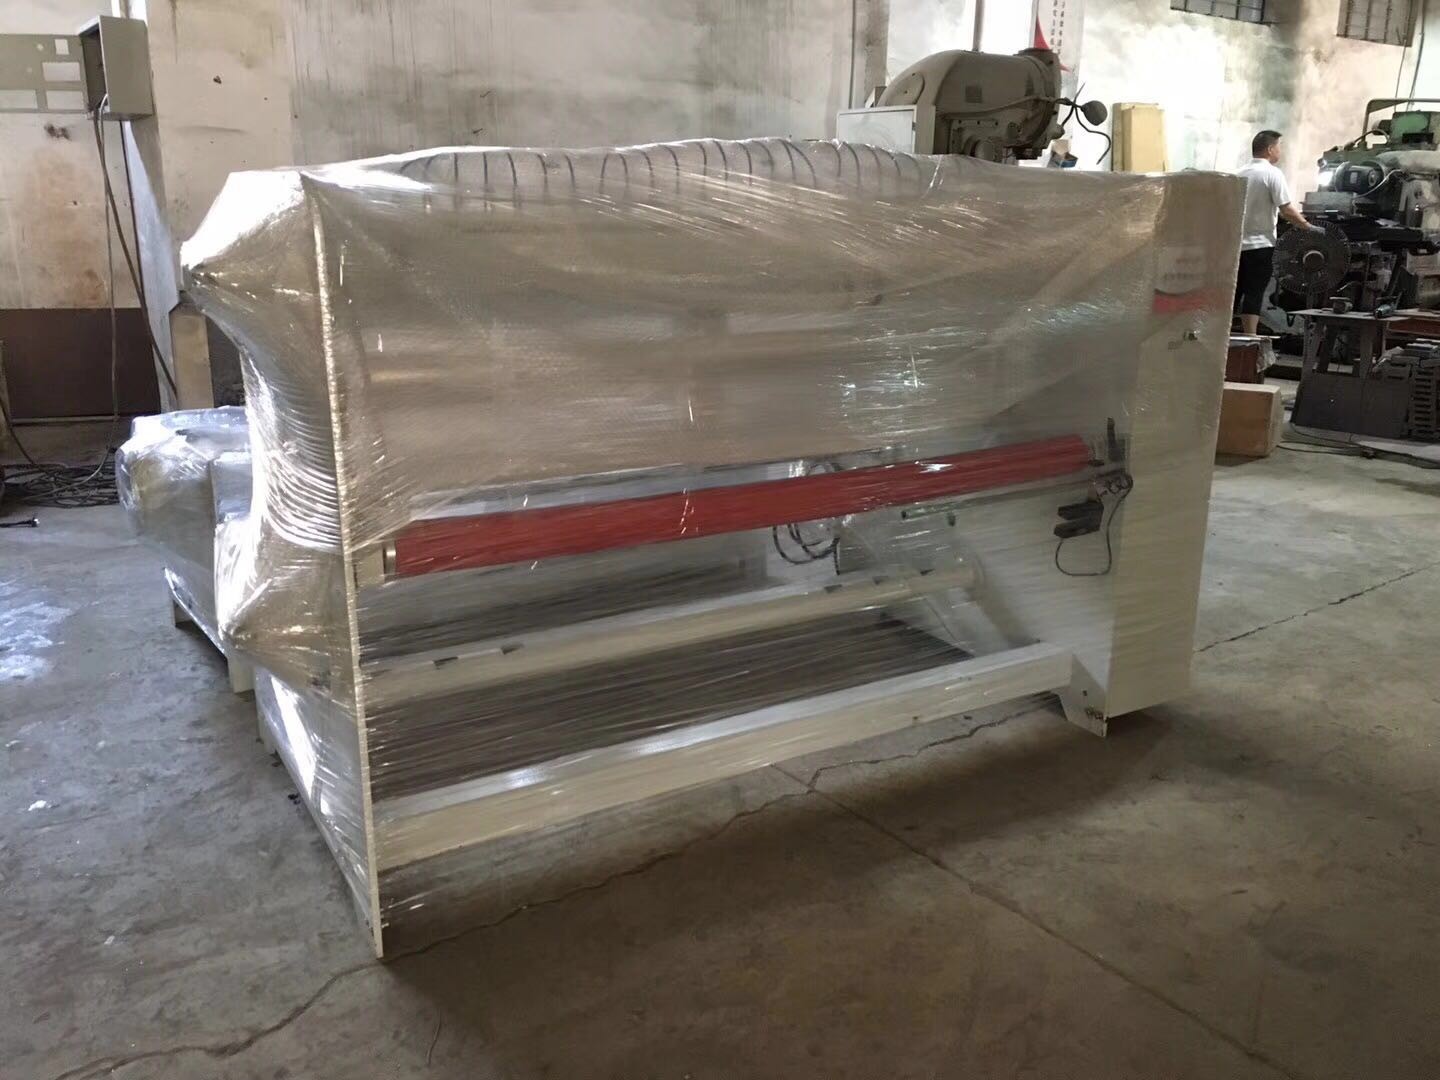 The EVA slitter is packaged and ready to be shipped to Portugal!